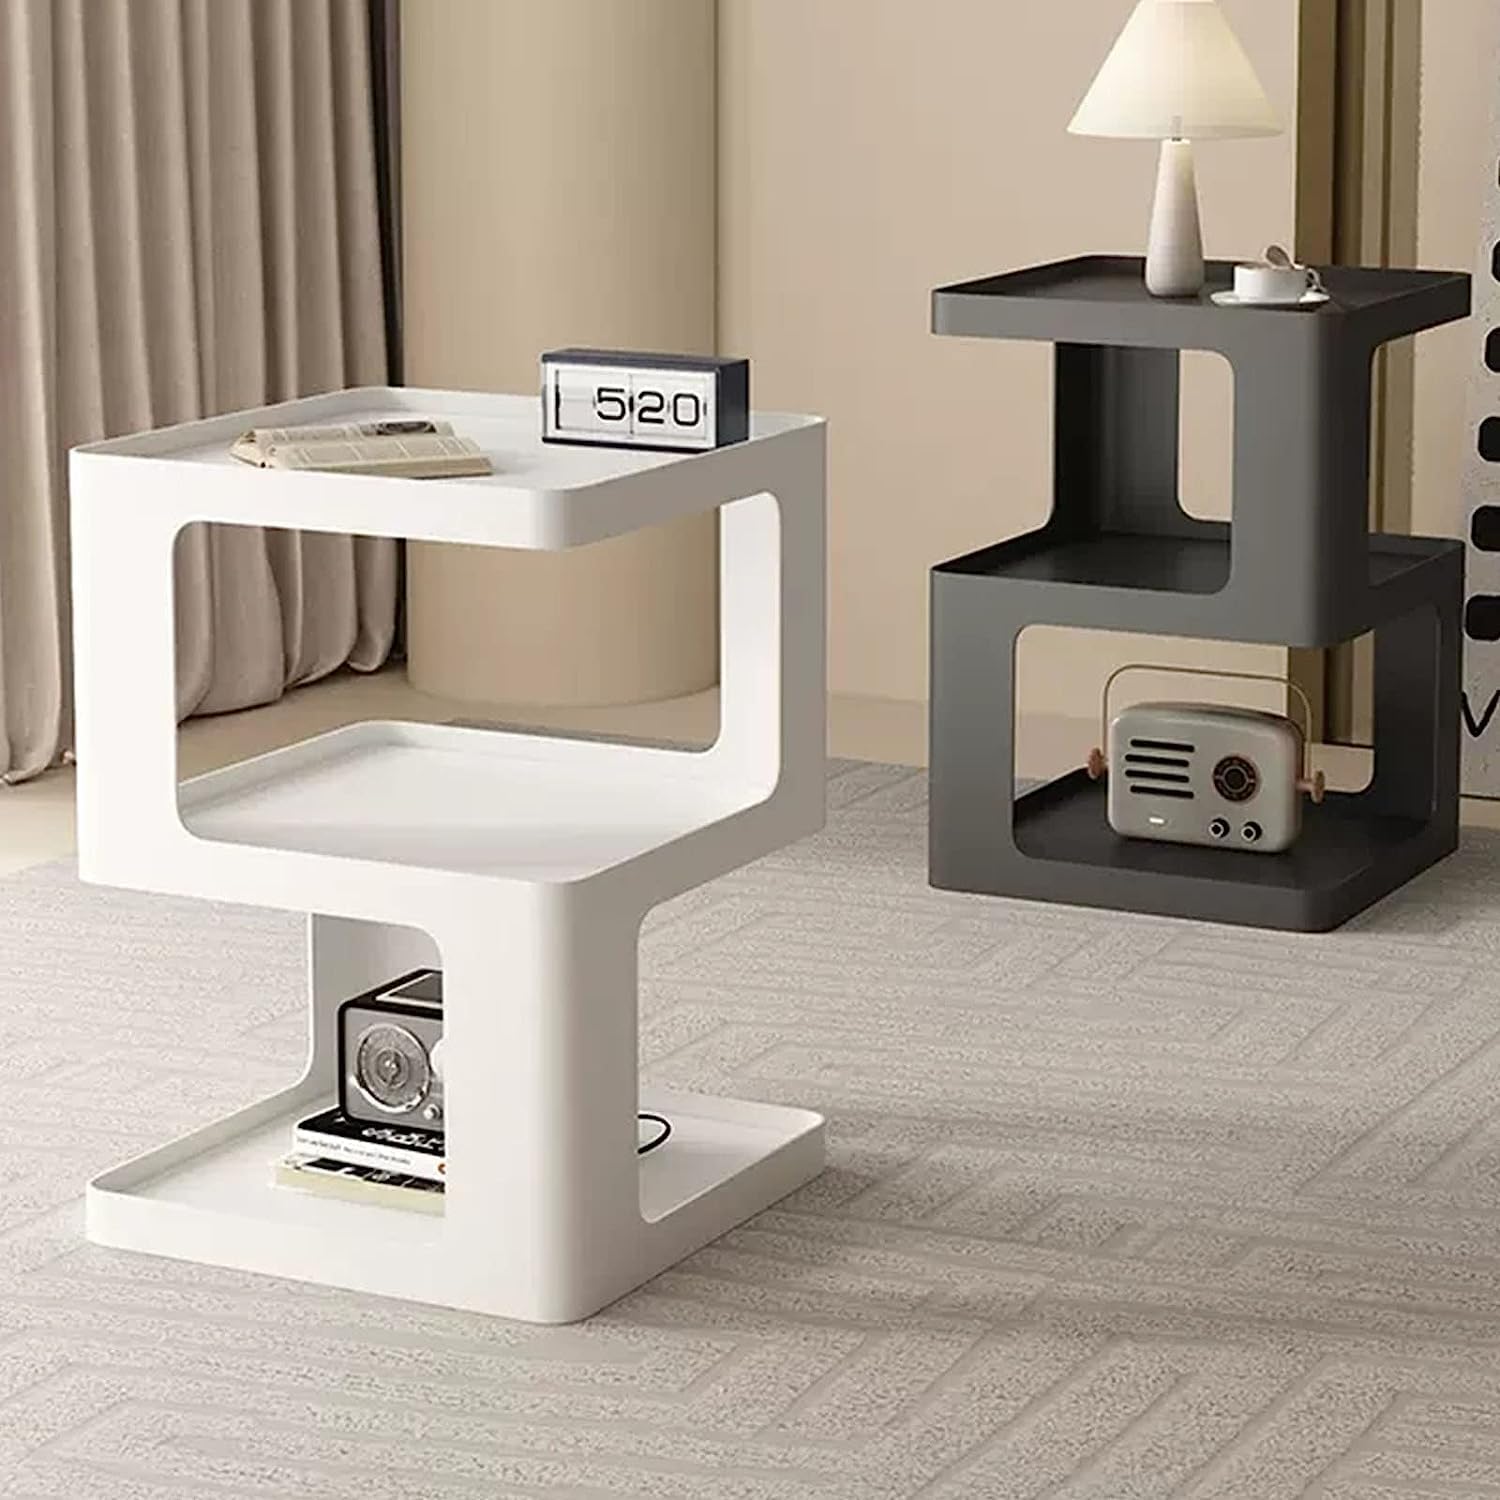 DS BS Modern Creative Design Bedside Table-White